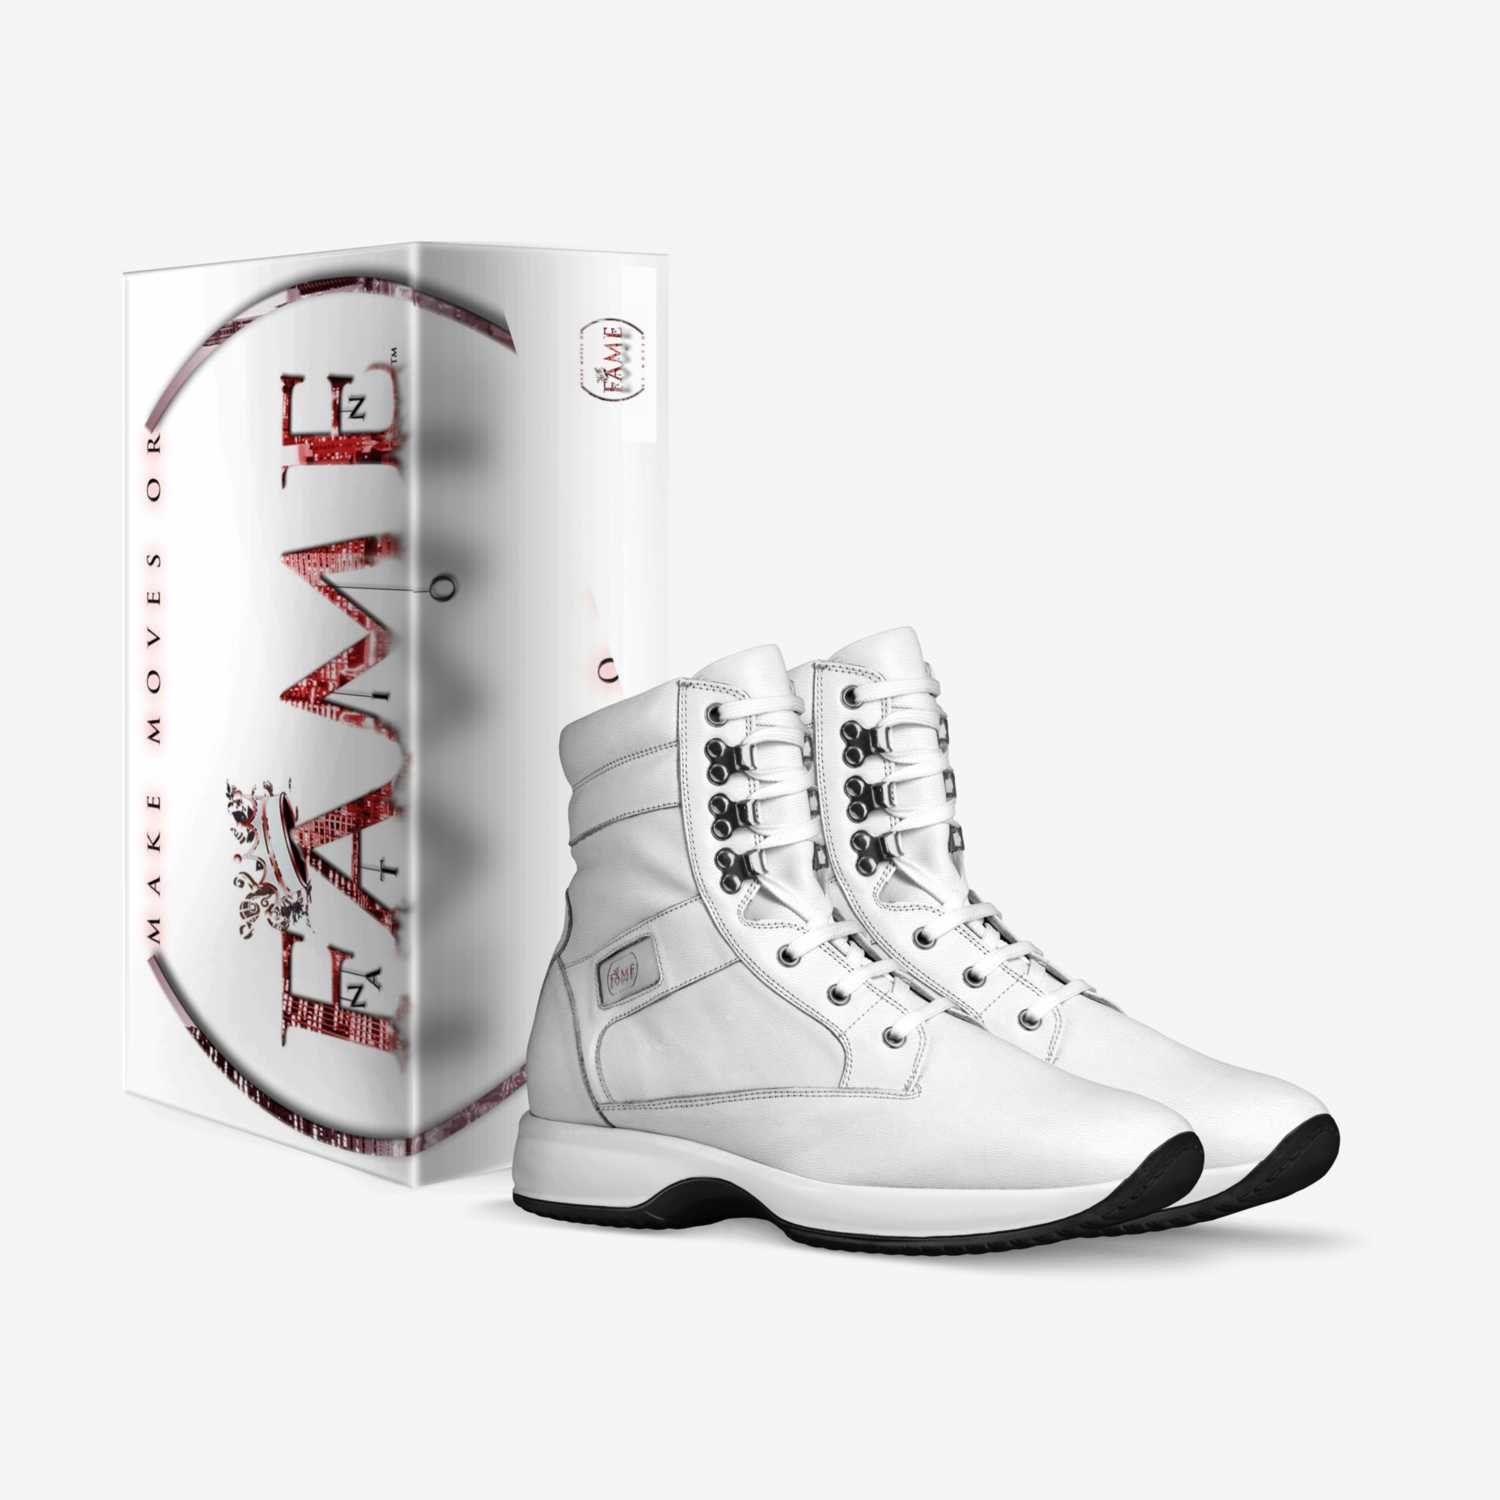 Fame Nation custom made in Italy shoes by Tonio Harvey | Box view